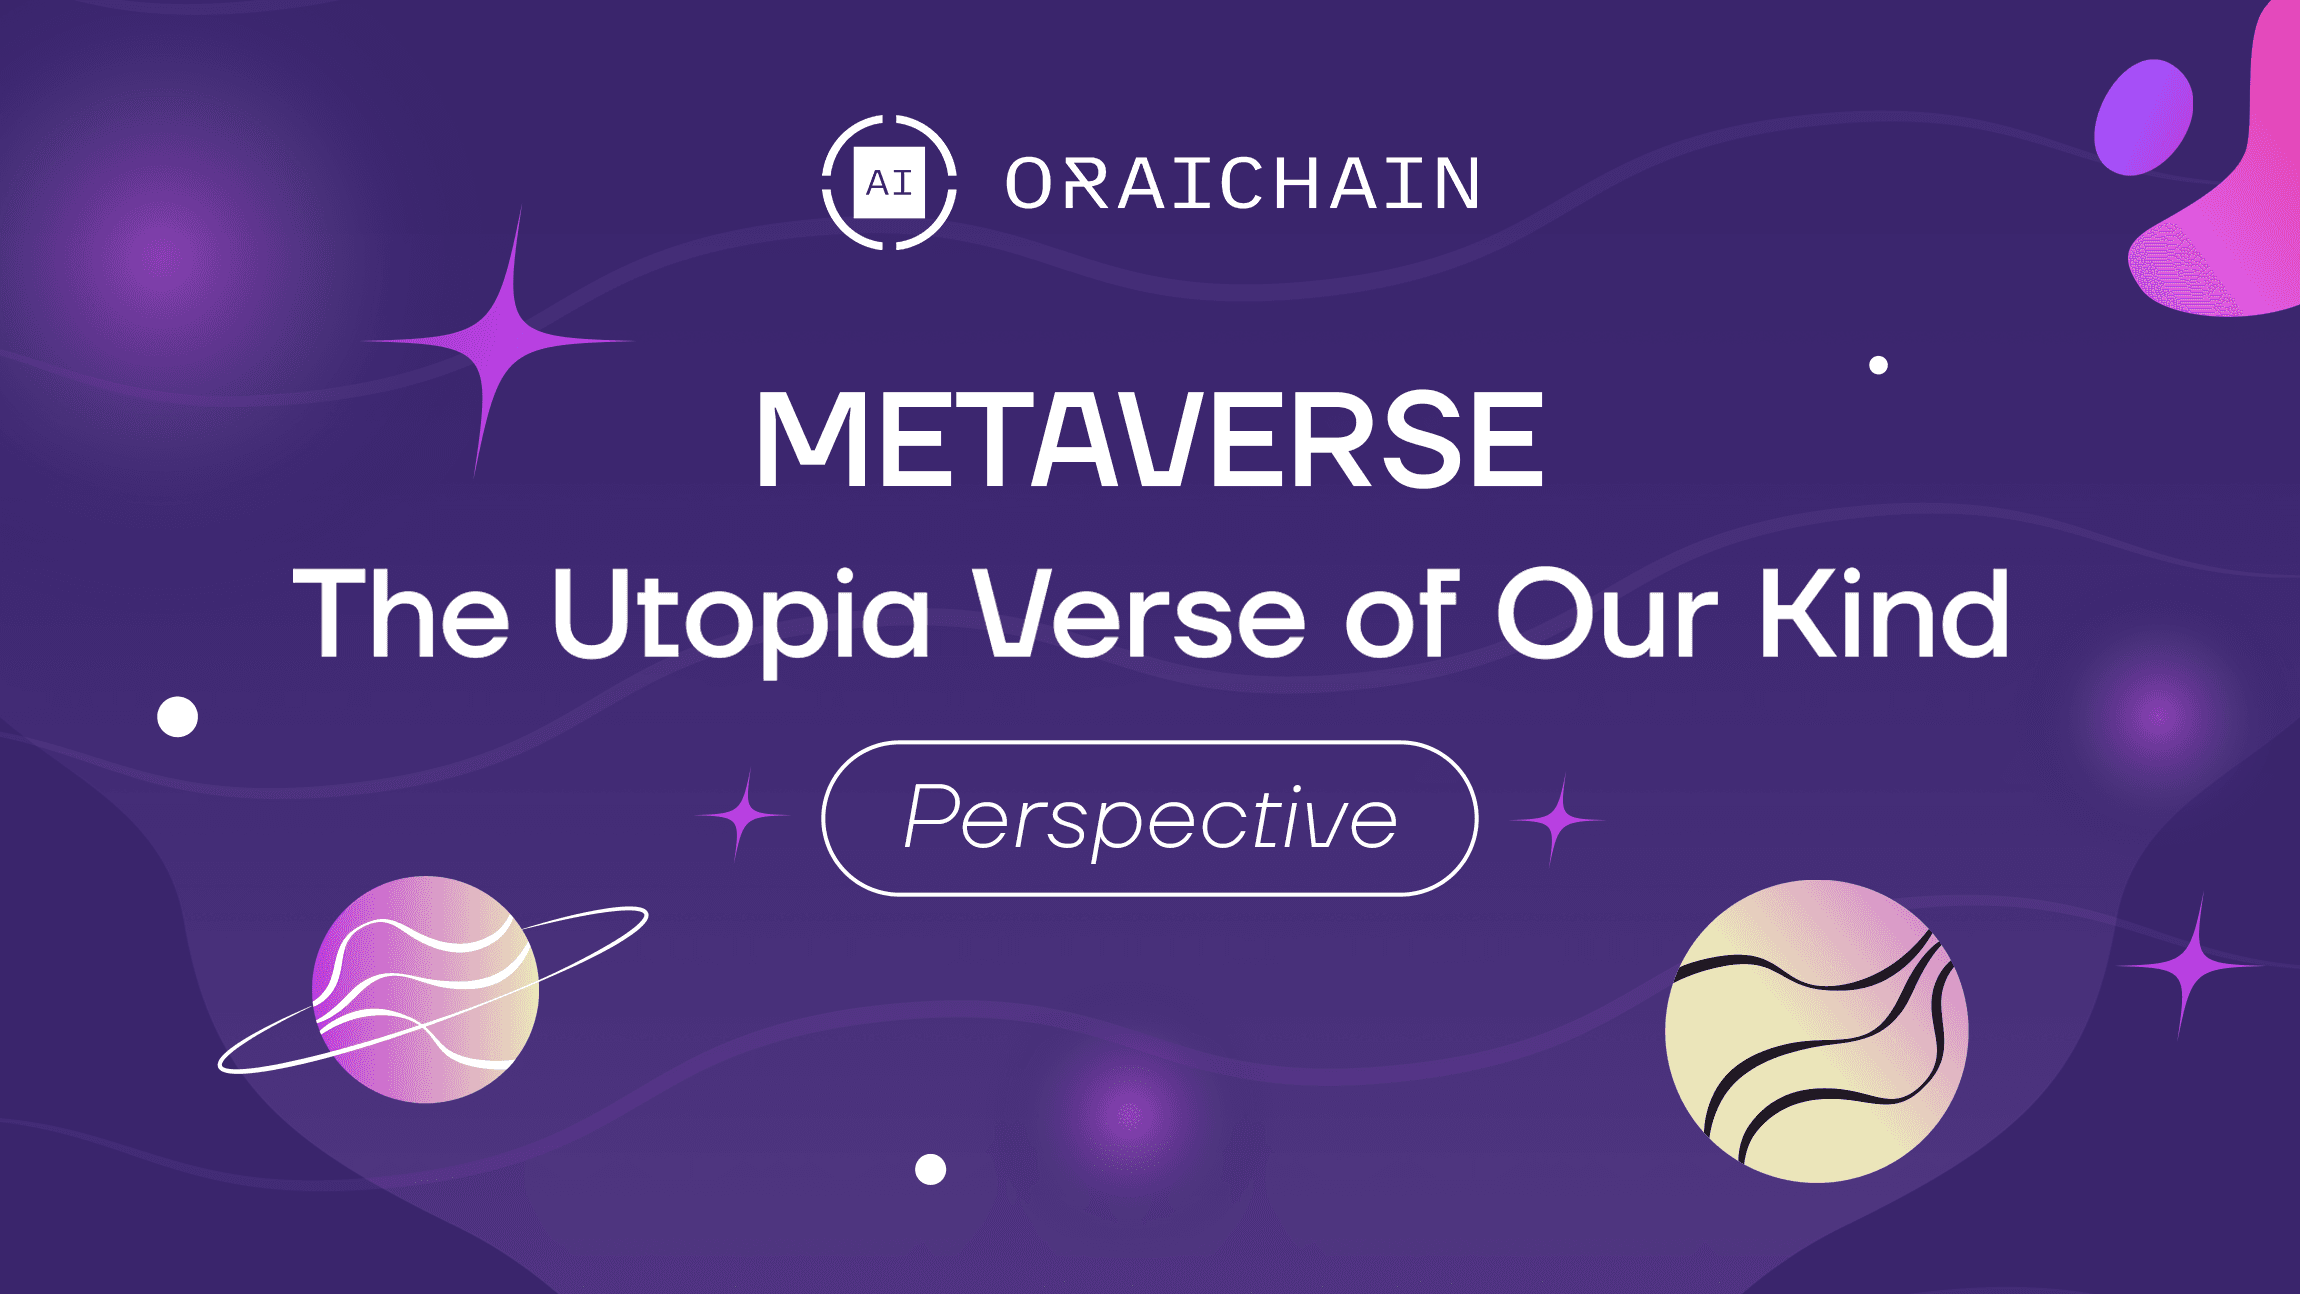 Metaverse - the Utopia Verse of Our Kind